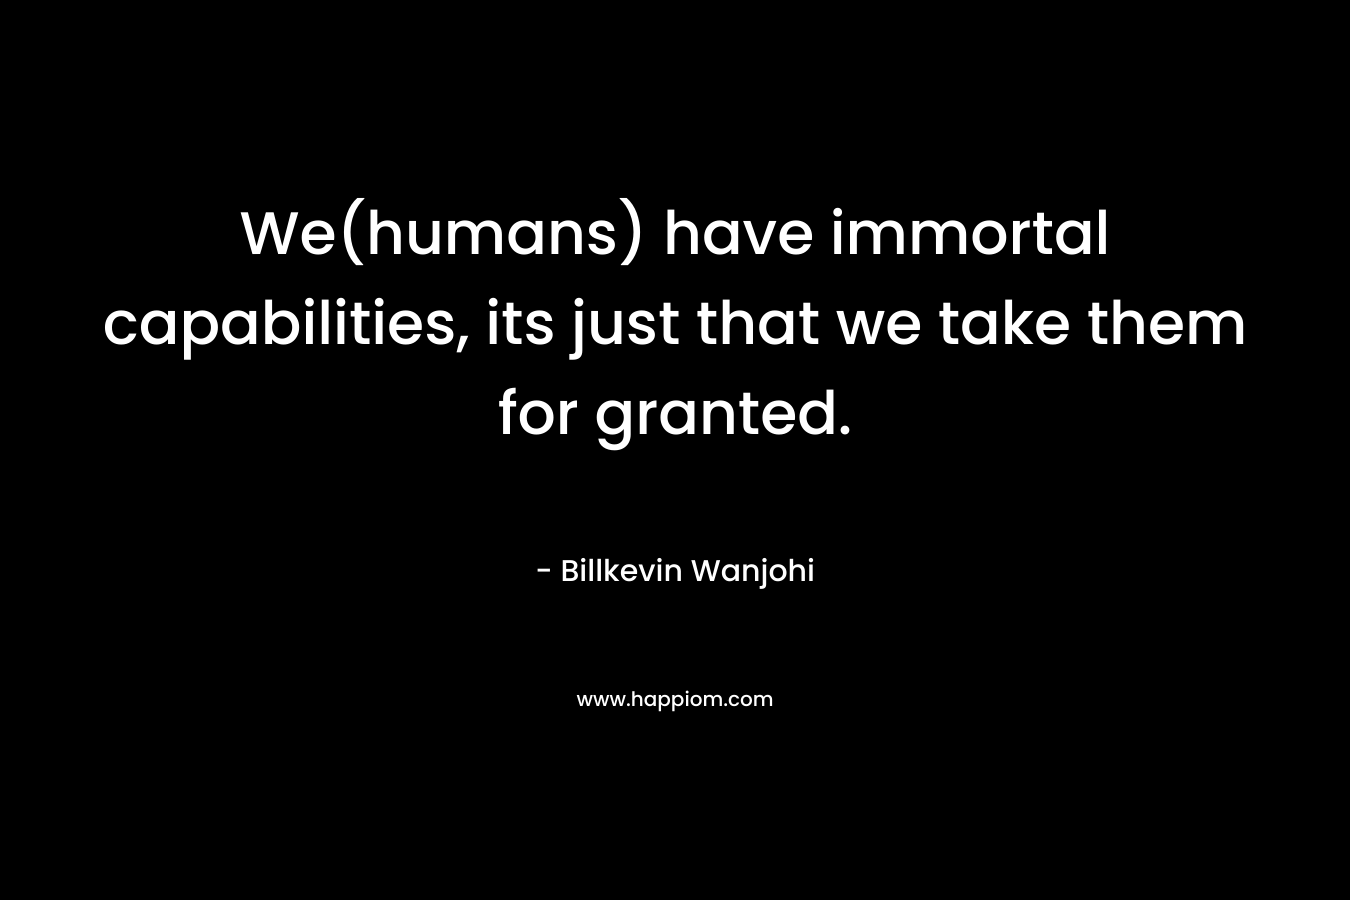 We(humans) have immortal capabilities, its just that we take them for granted.